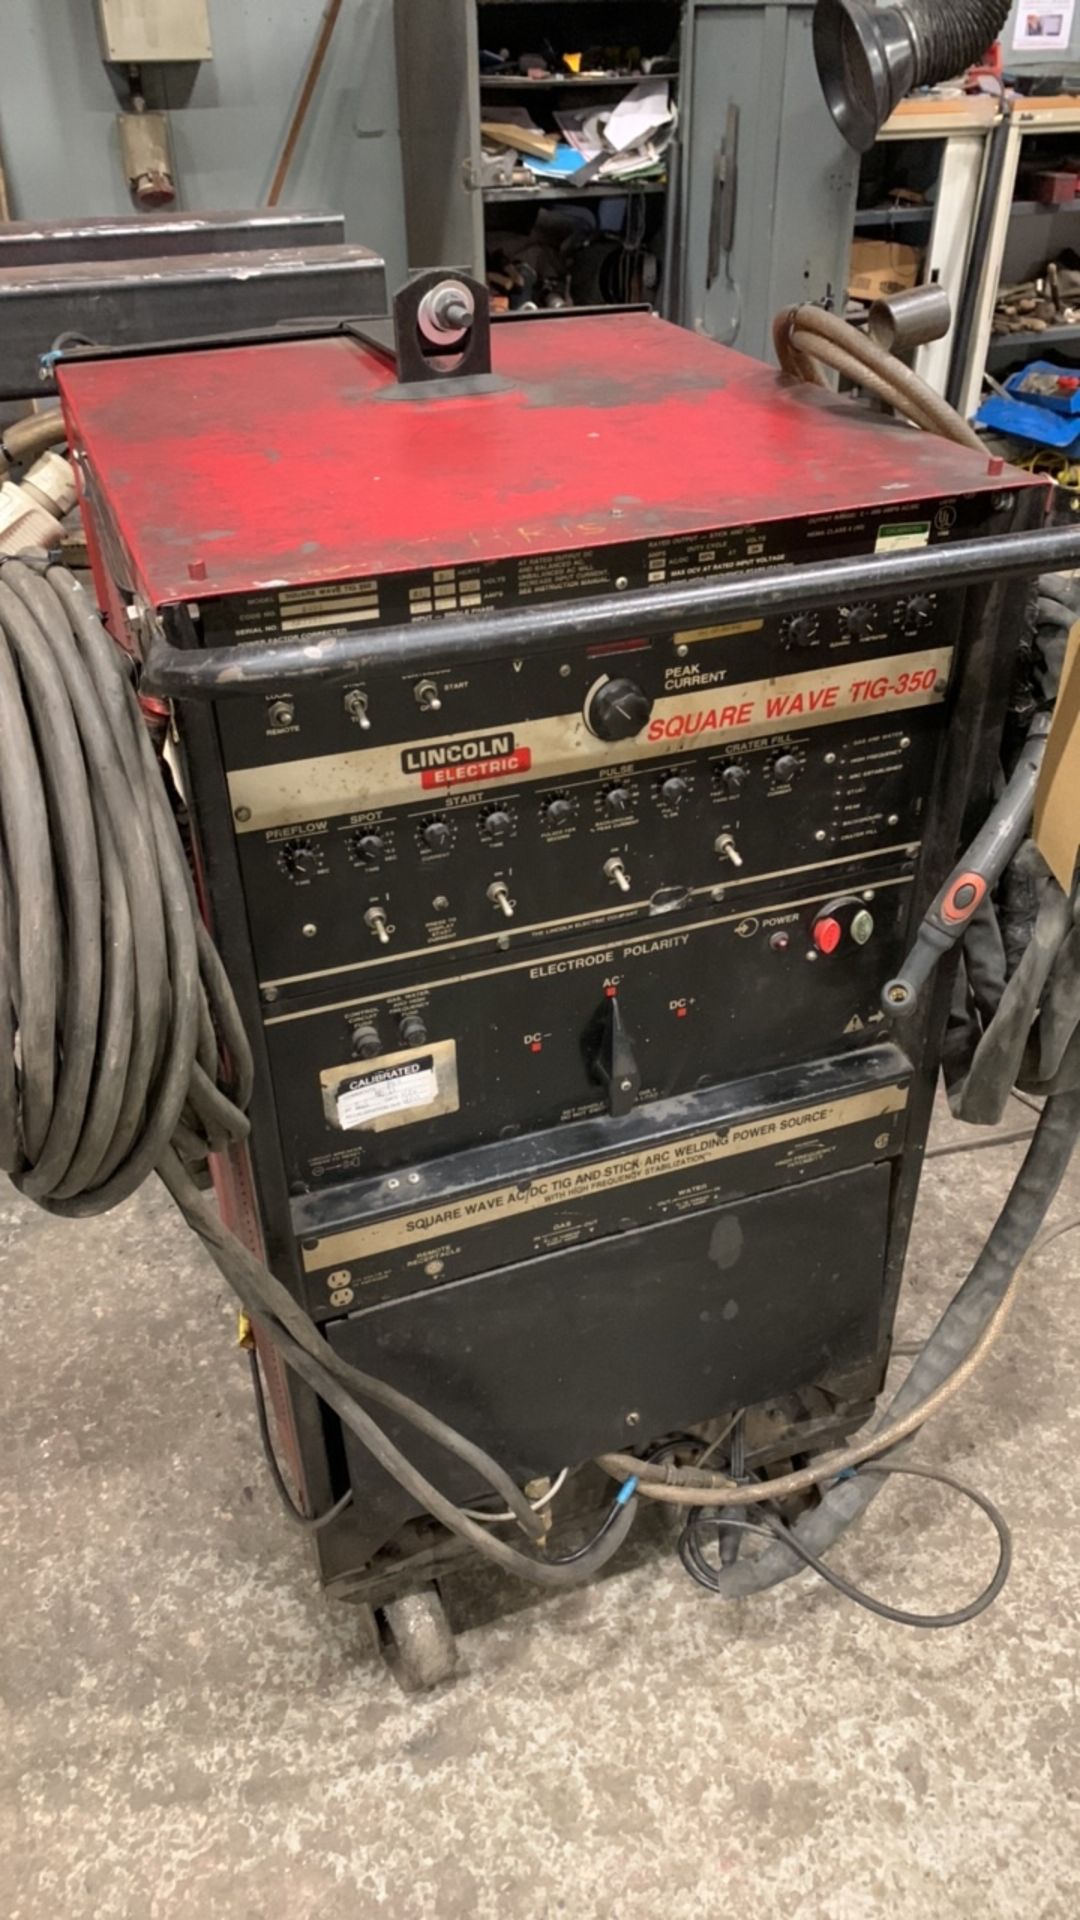 Lincoln Electric Square Wave TIG-350 Welder, Serial No. AC771686 with Parweld Water recirculation Sy